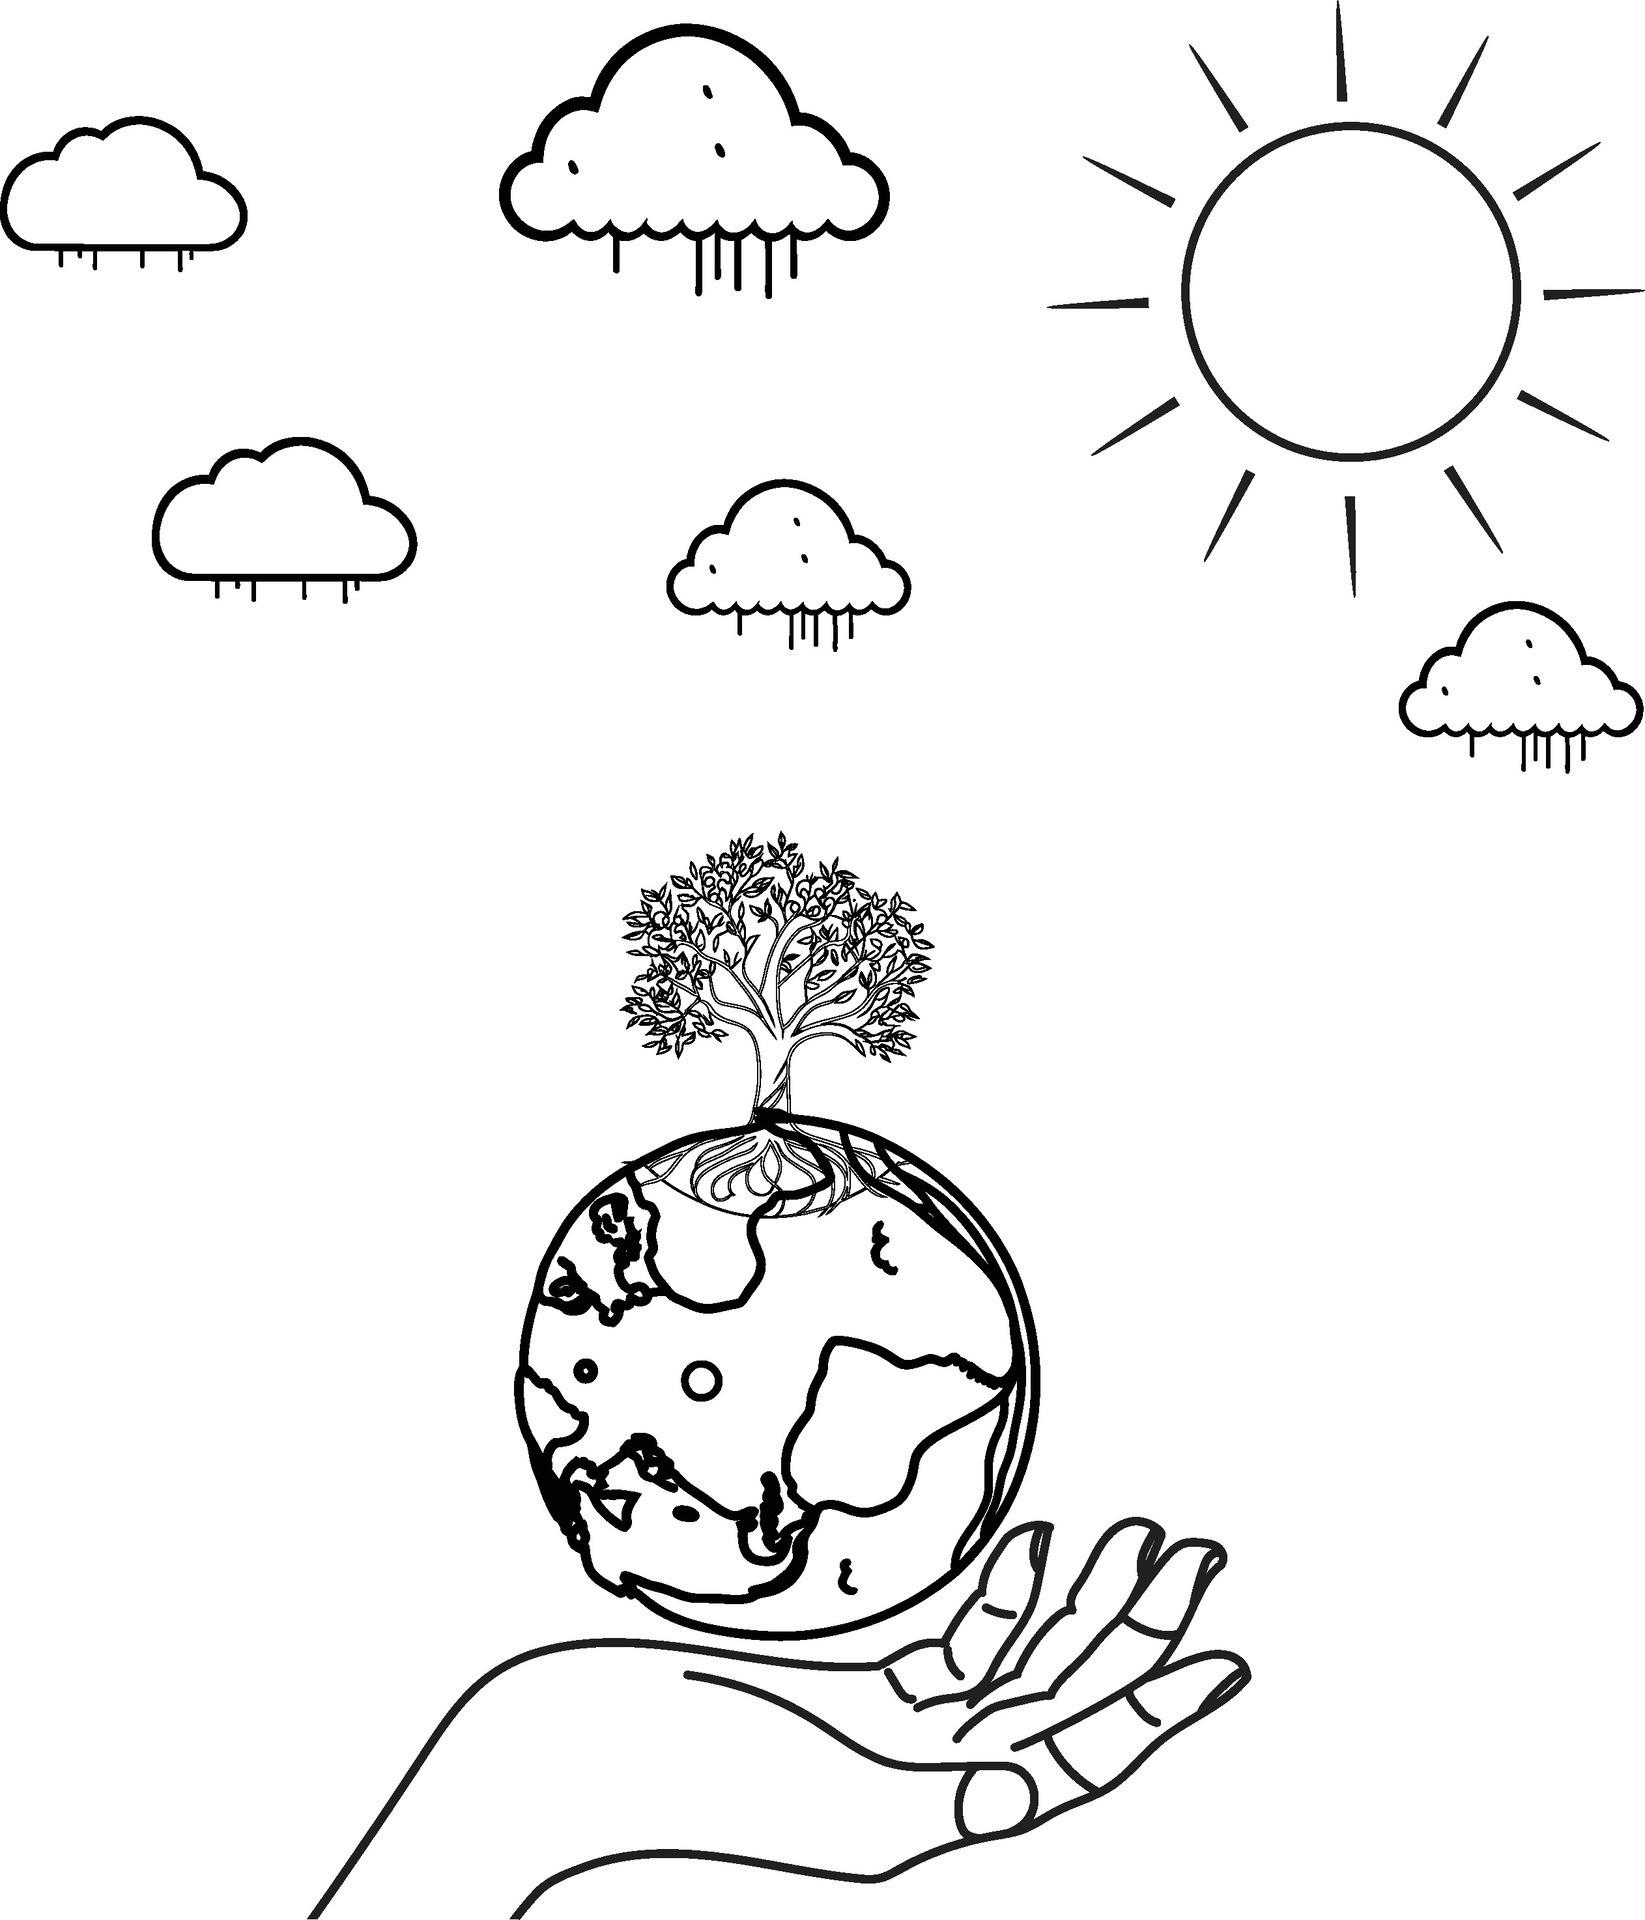 How to draw world environment day poster, Save trees save nature with  pencil sketch | World environment day posters, Drawings, World environment  day